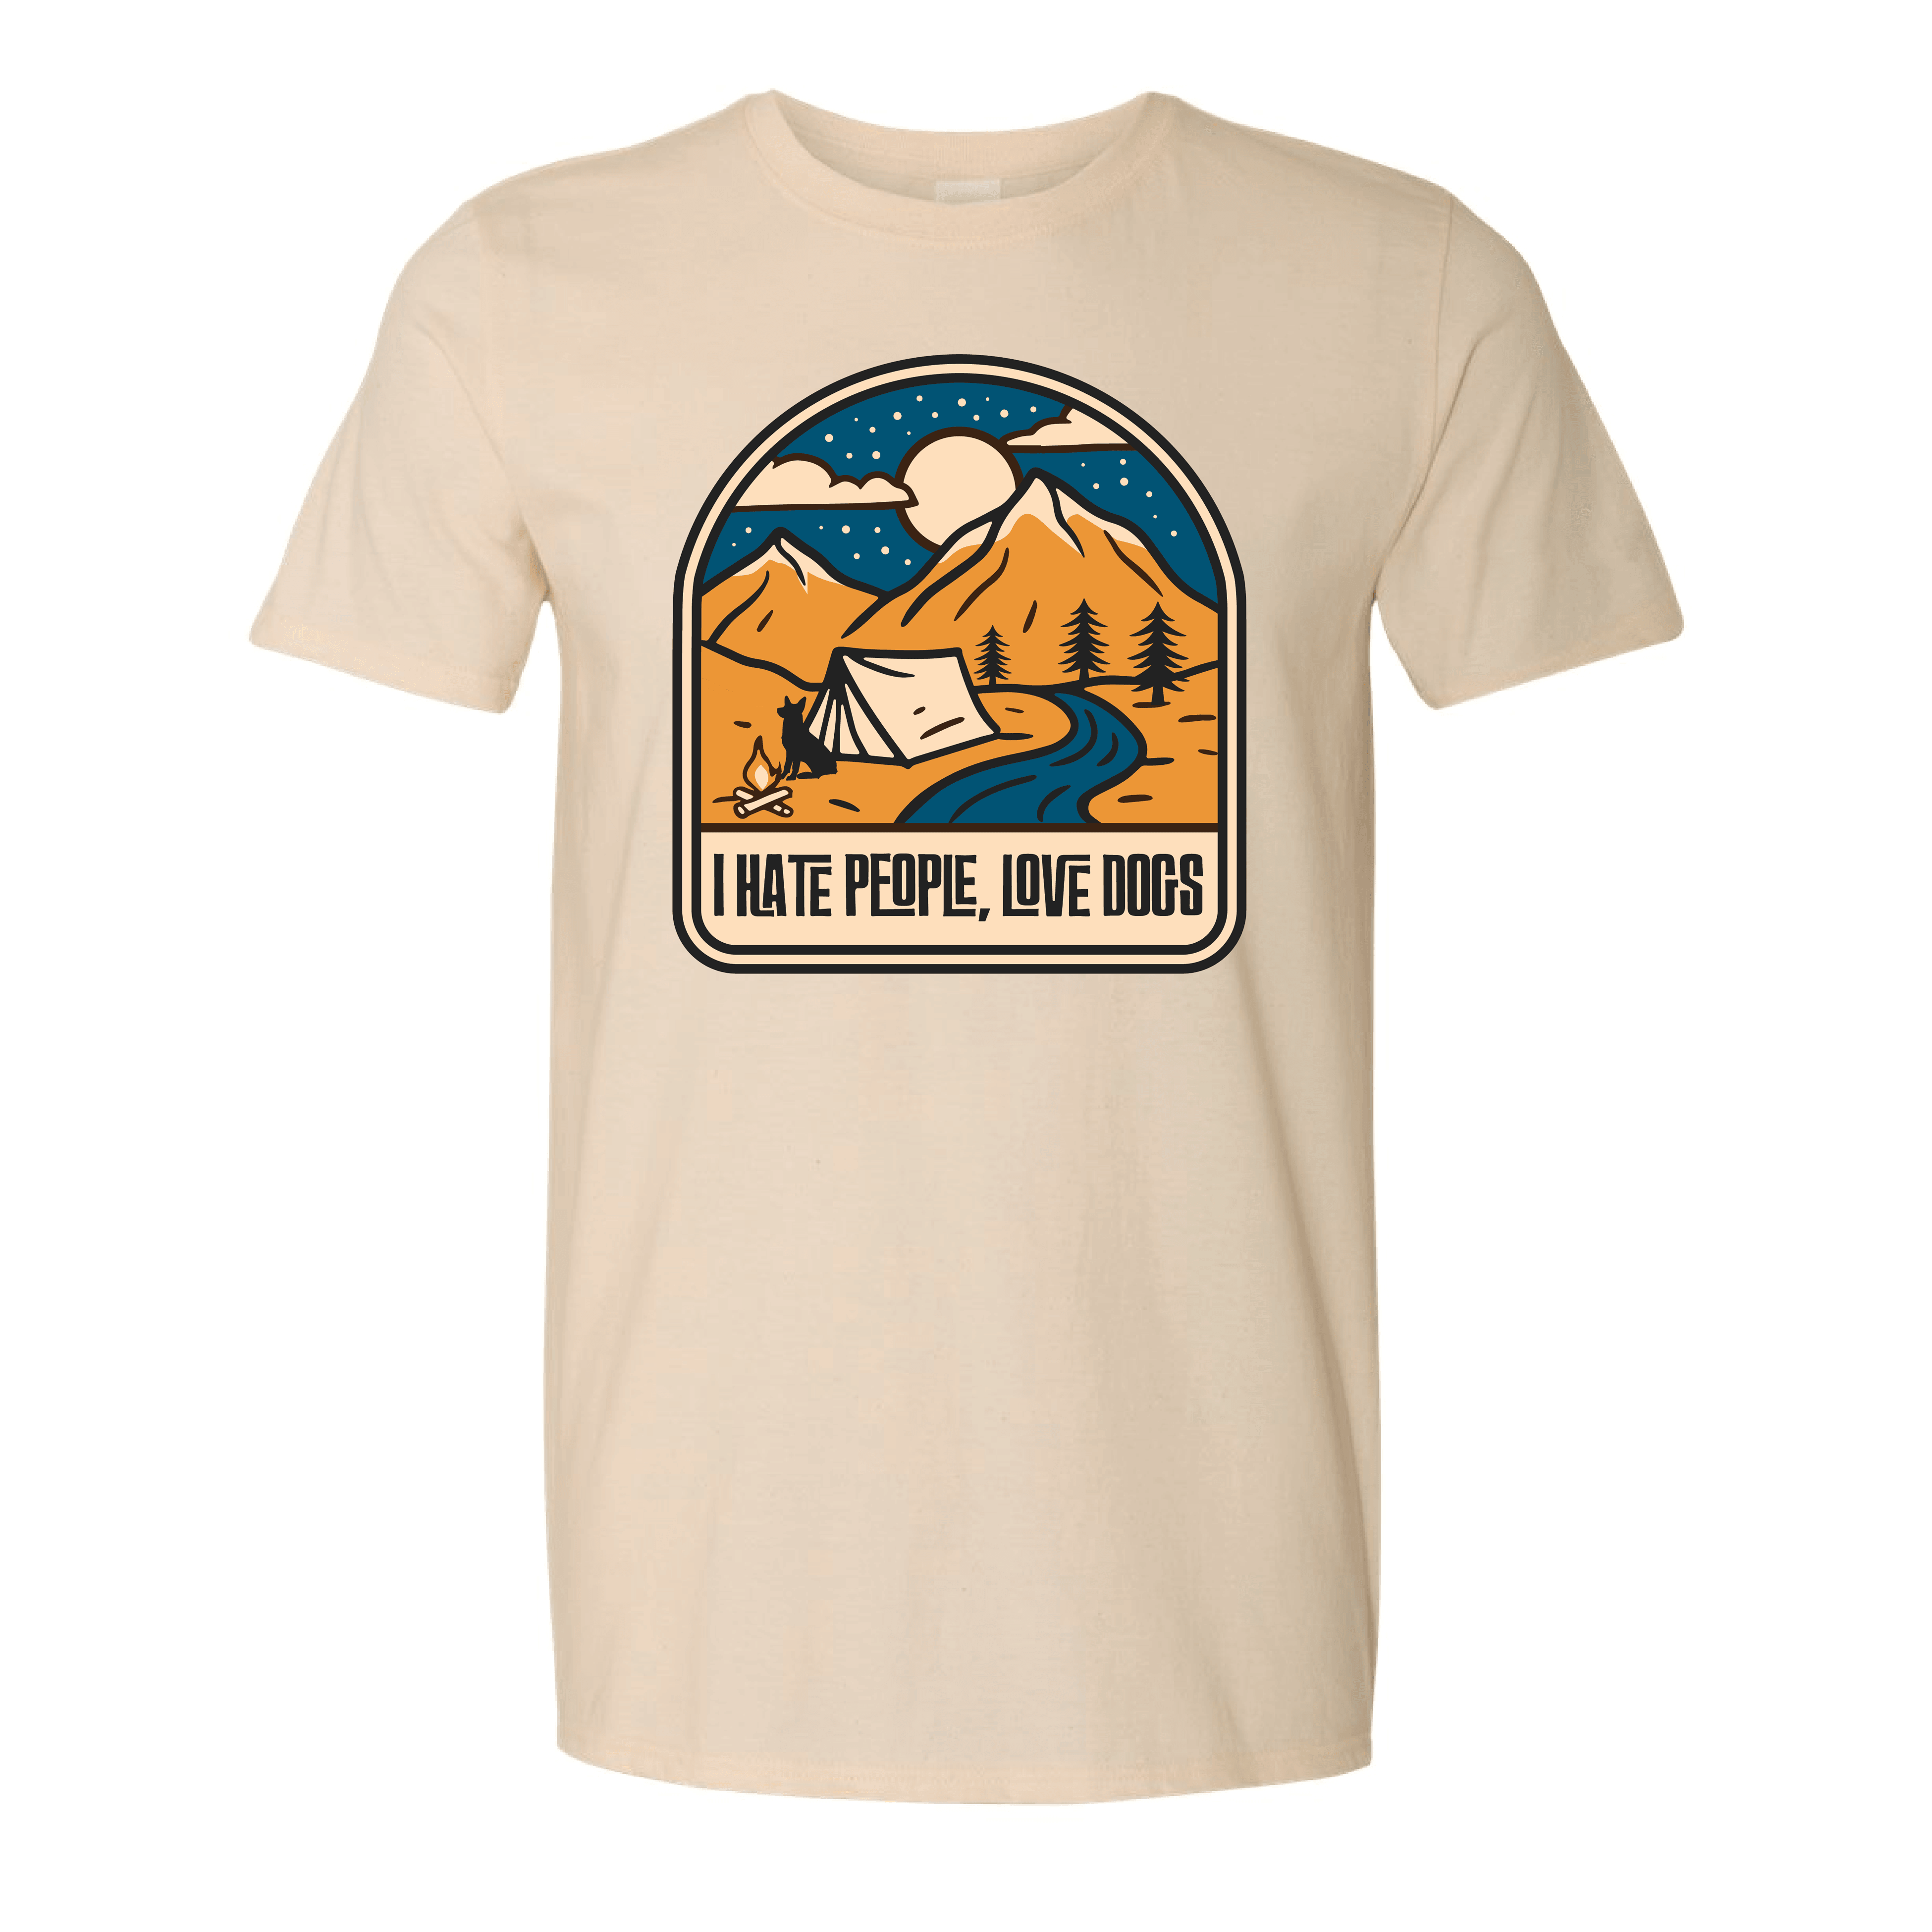 Hate People Love Dogs T-Shirt - Ales to Trails